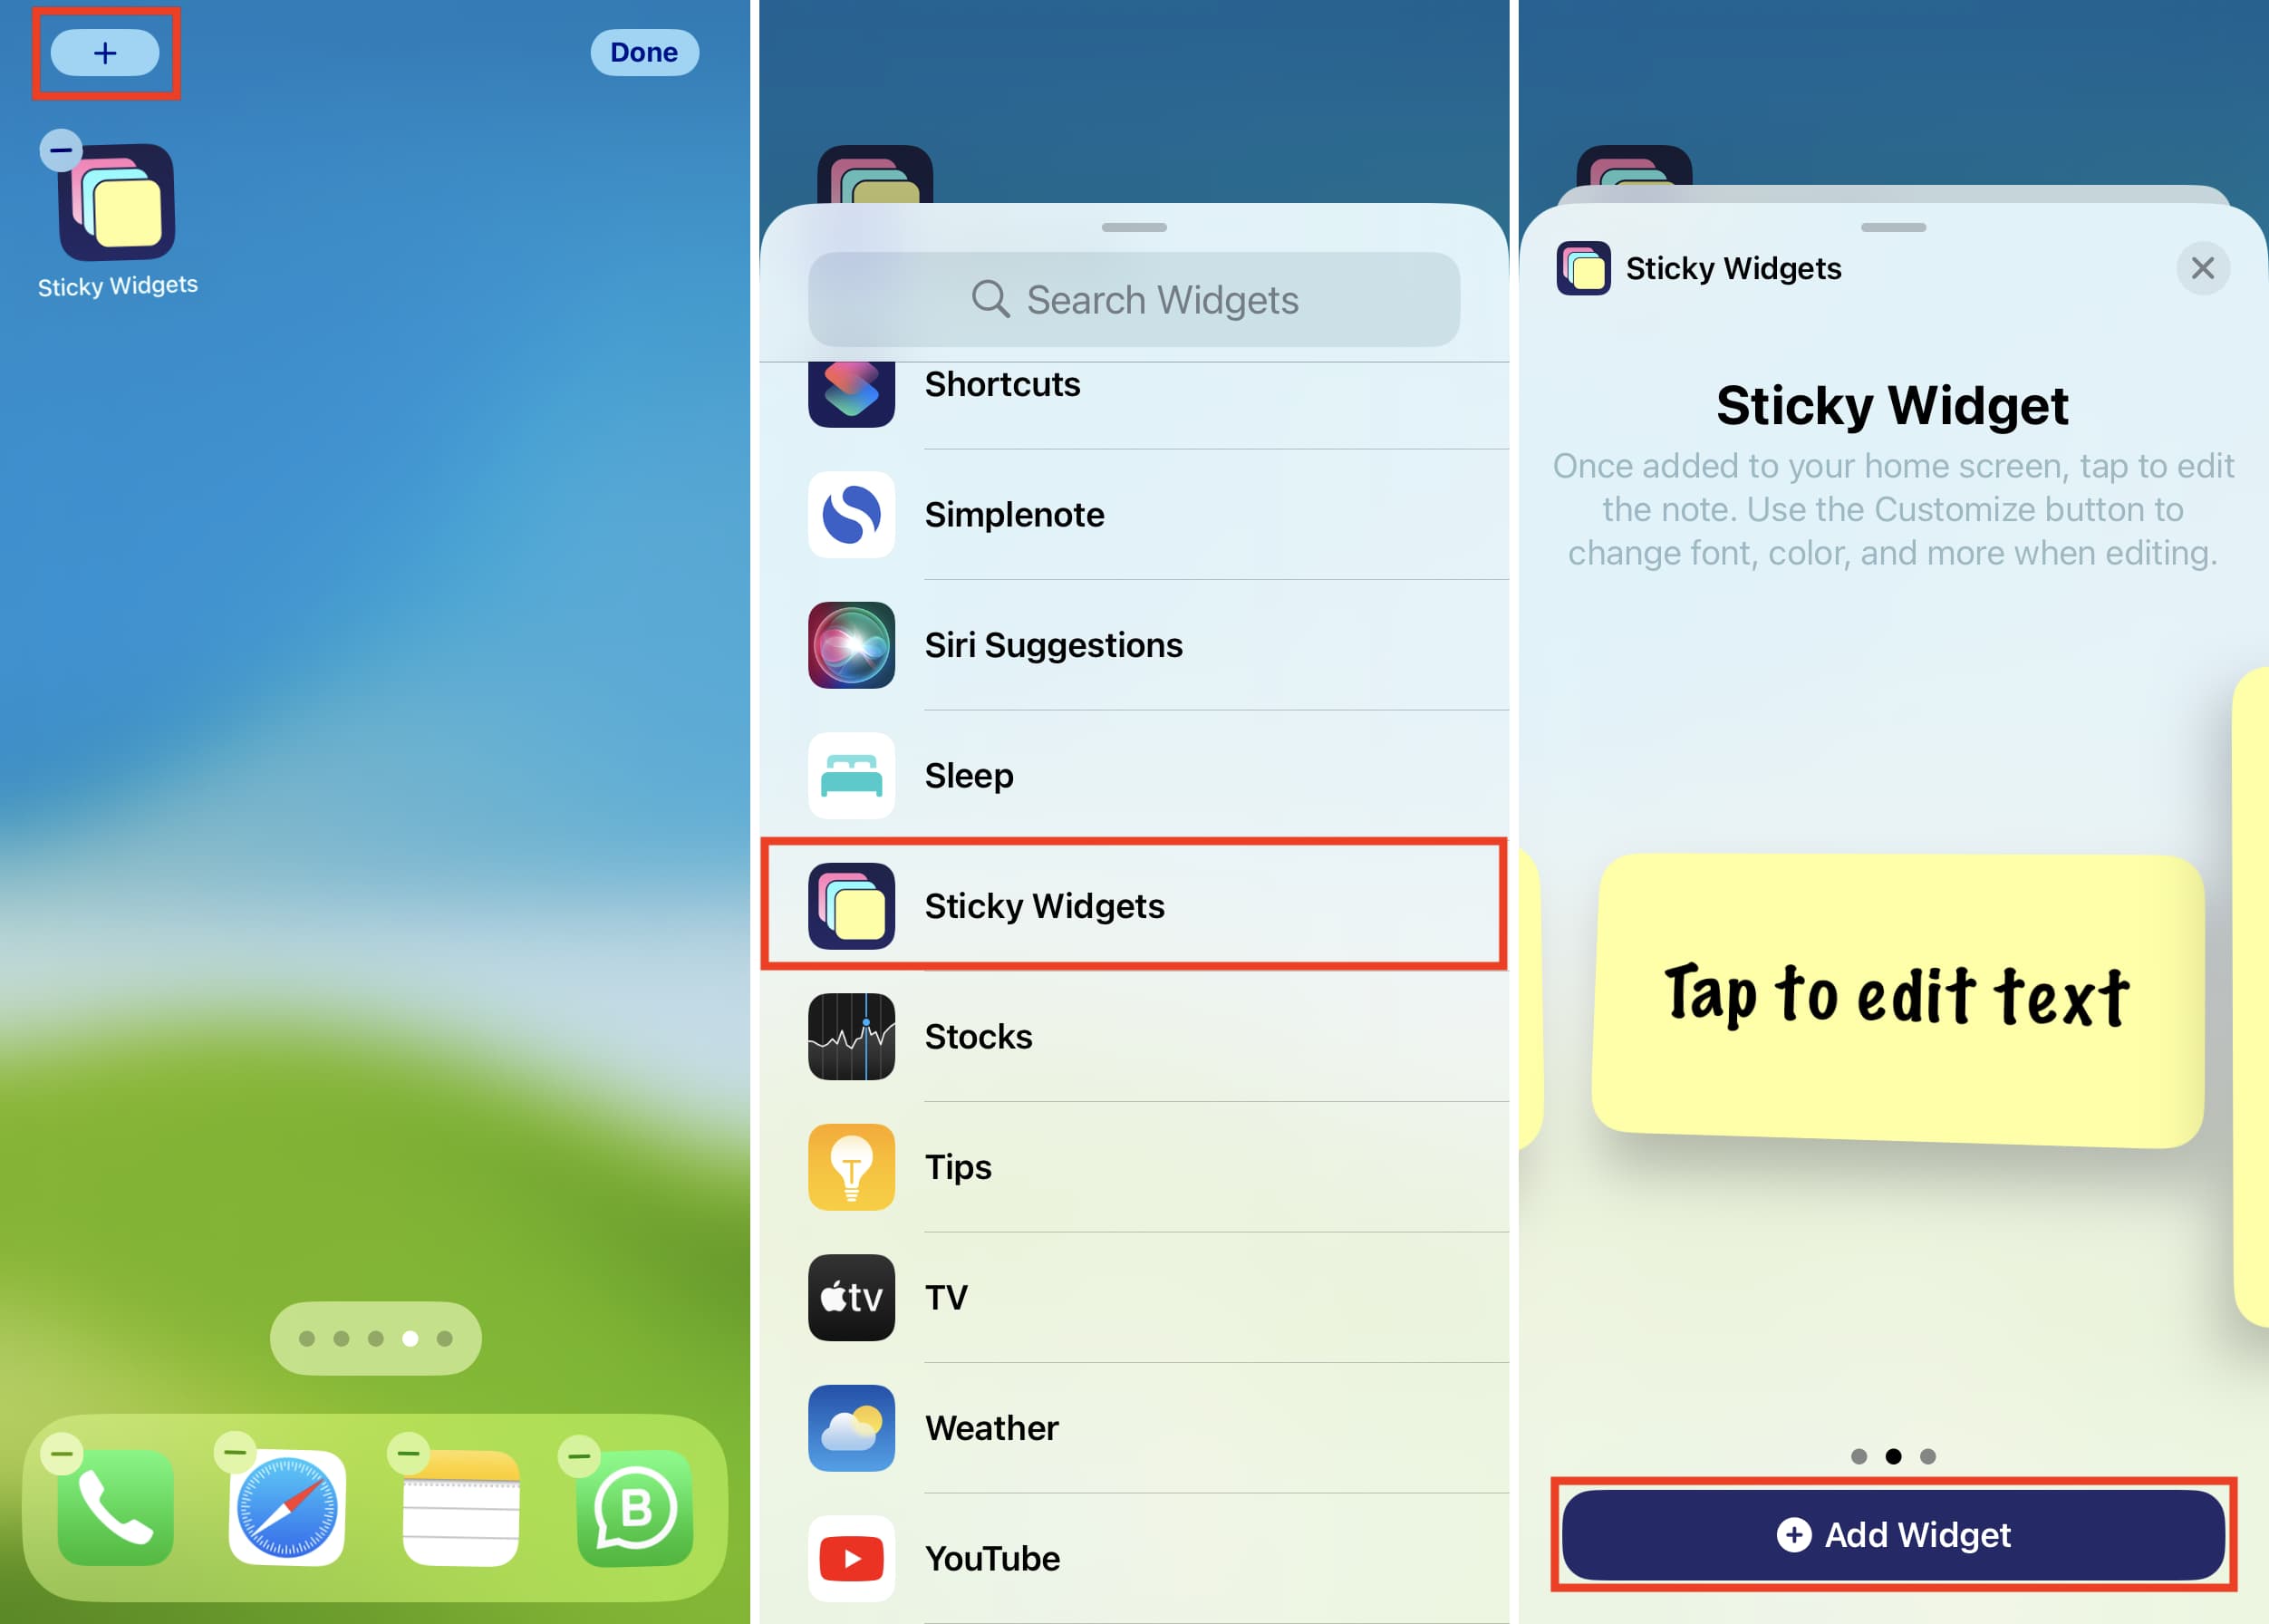 Add Sticky Widgets to iPhone Home Screen